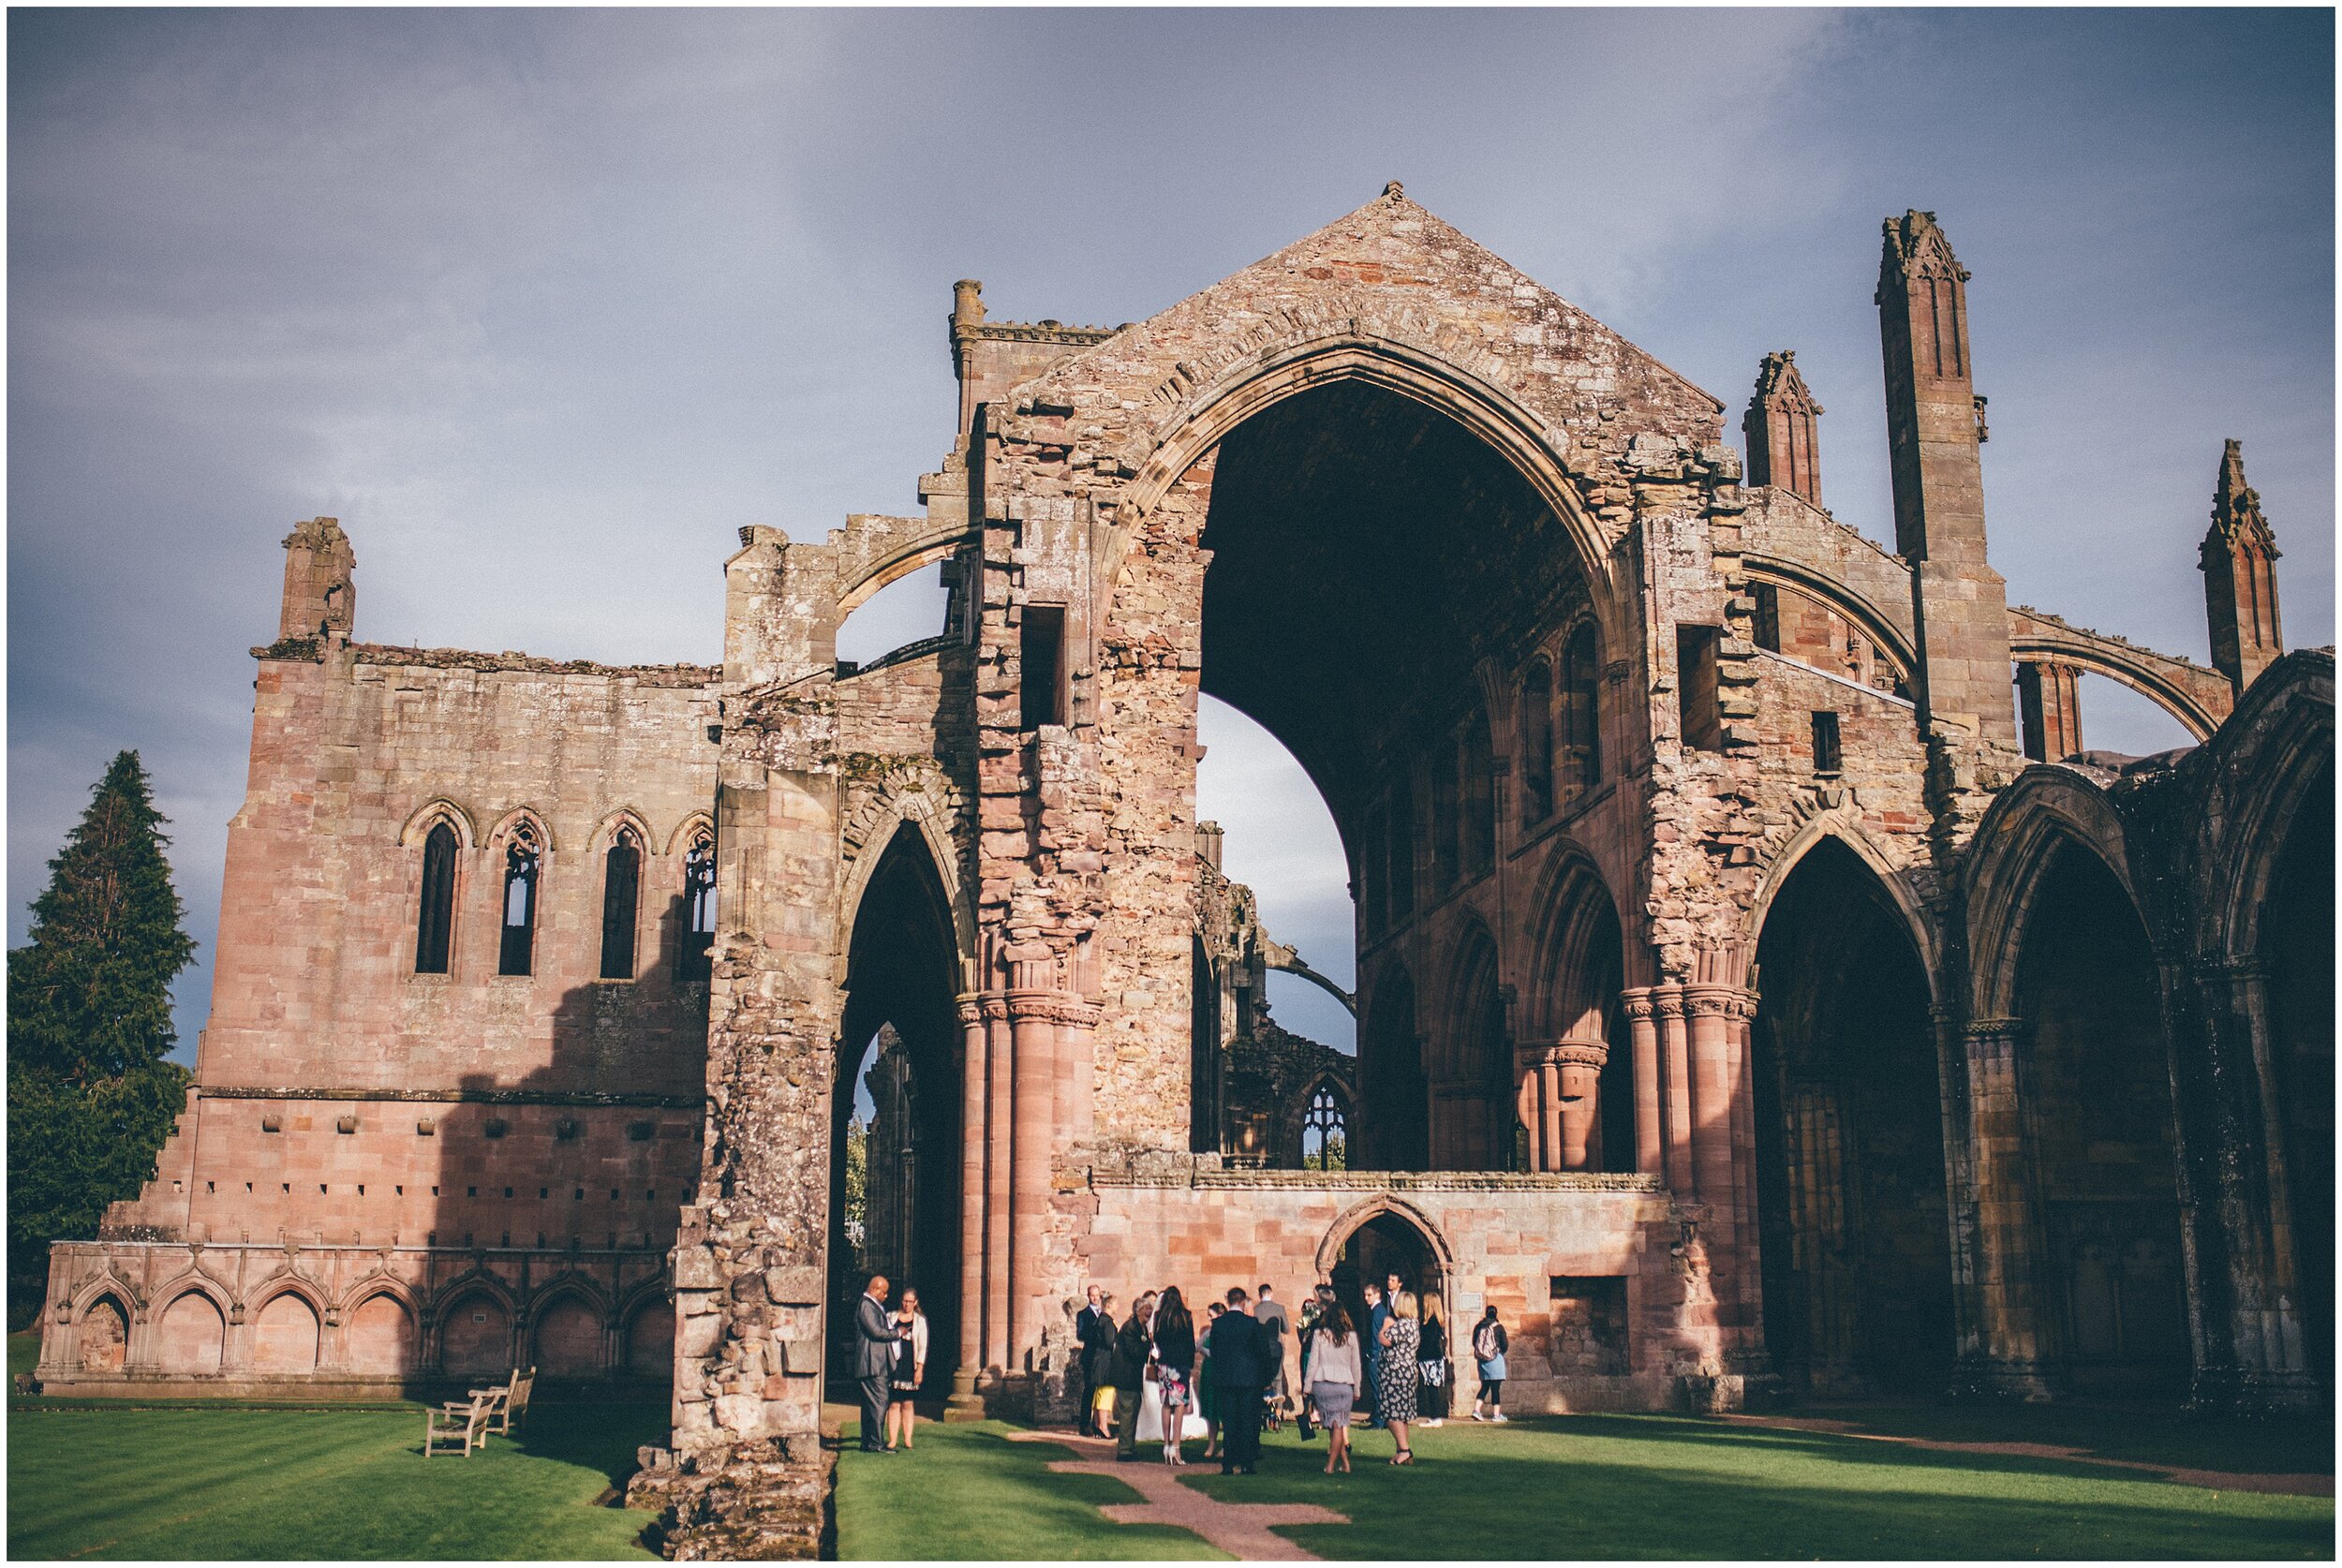 Wedding at a wedding in Melrose Abbey on Scottish Borders.